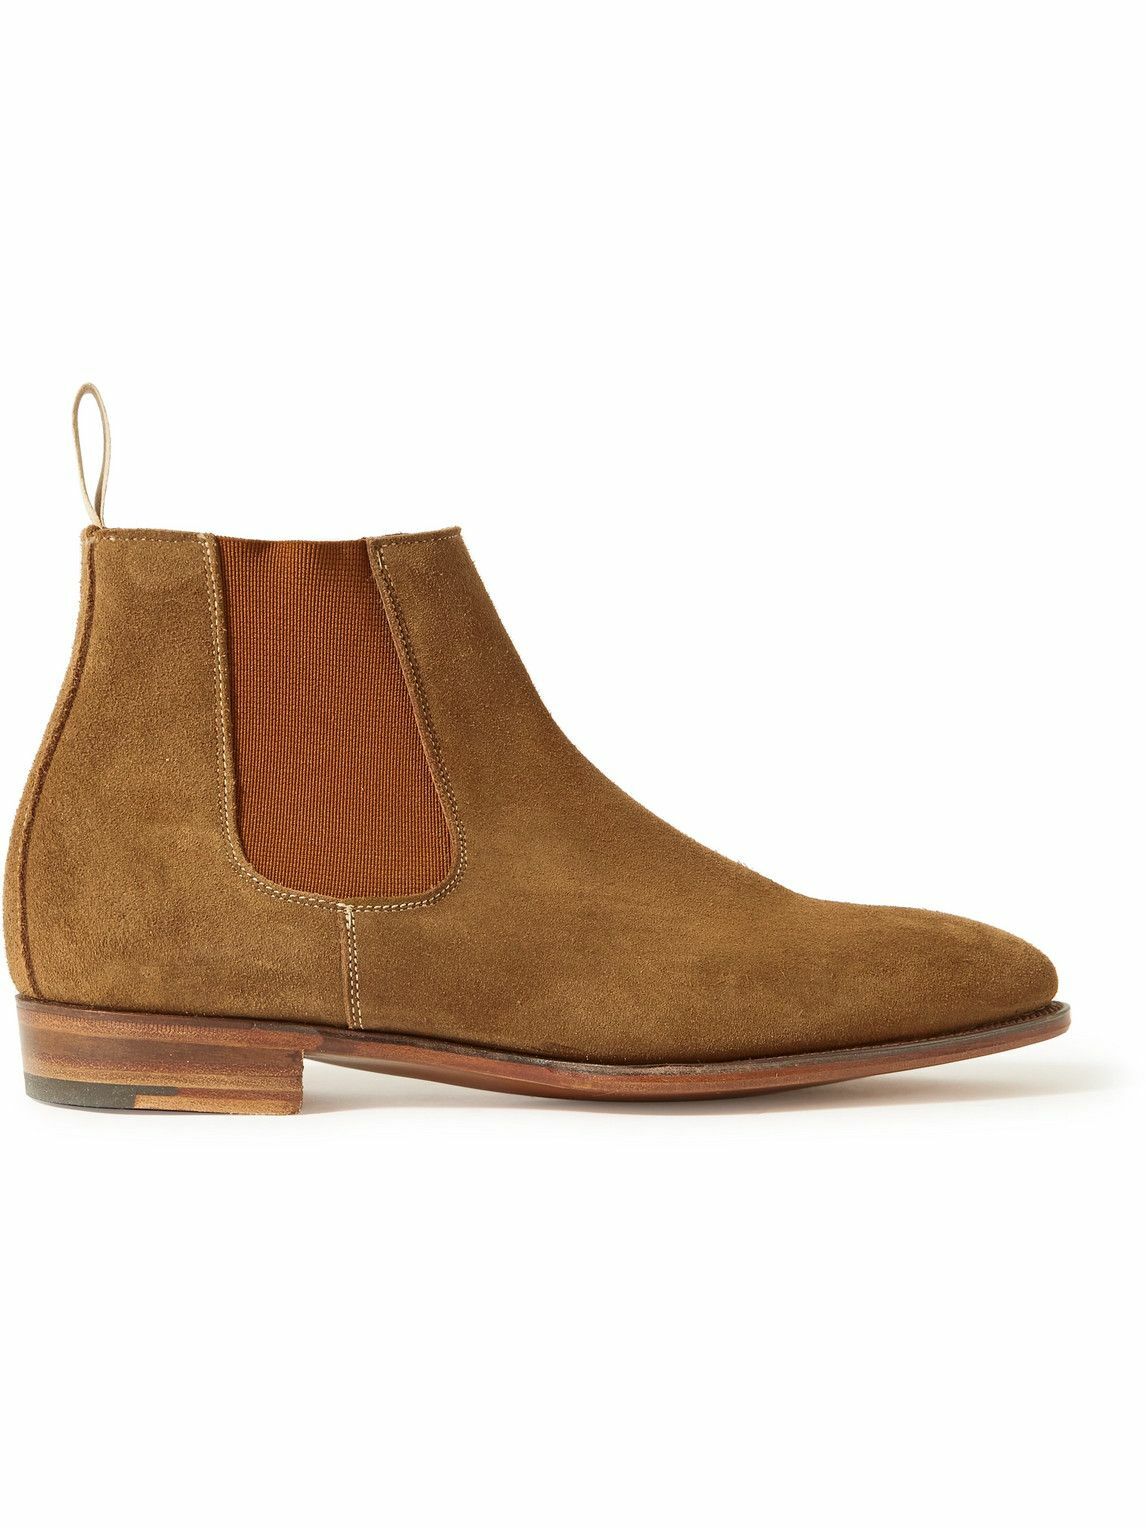 George Cleverley - Jason Suede Chelsea Boots - Neutrals George Cleverley